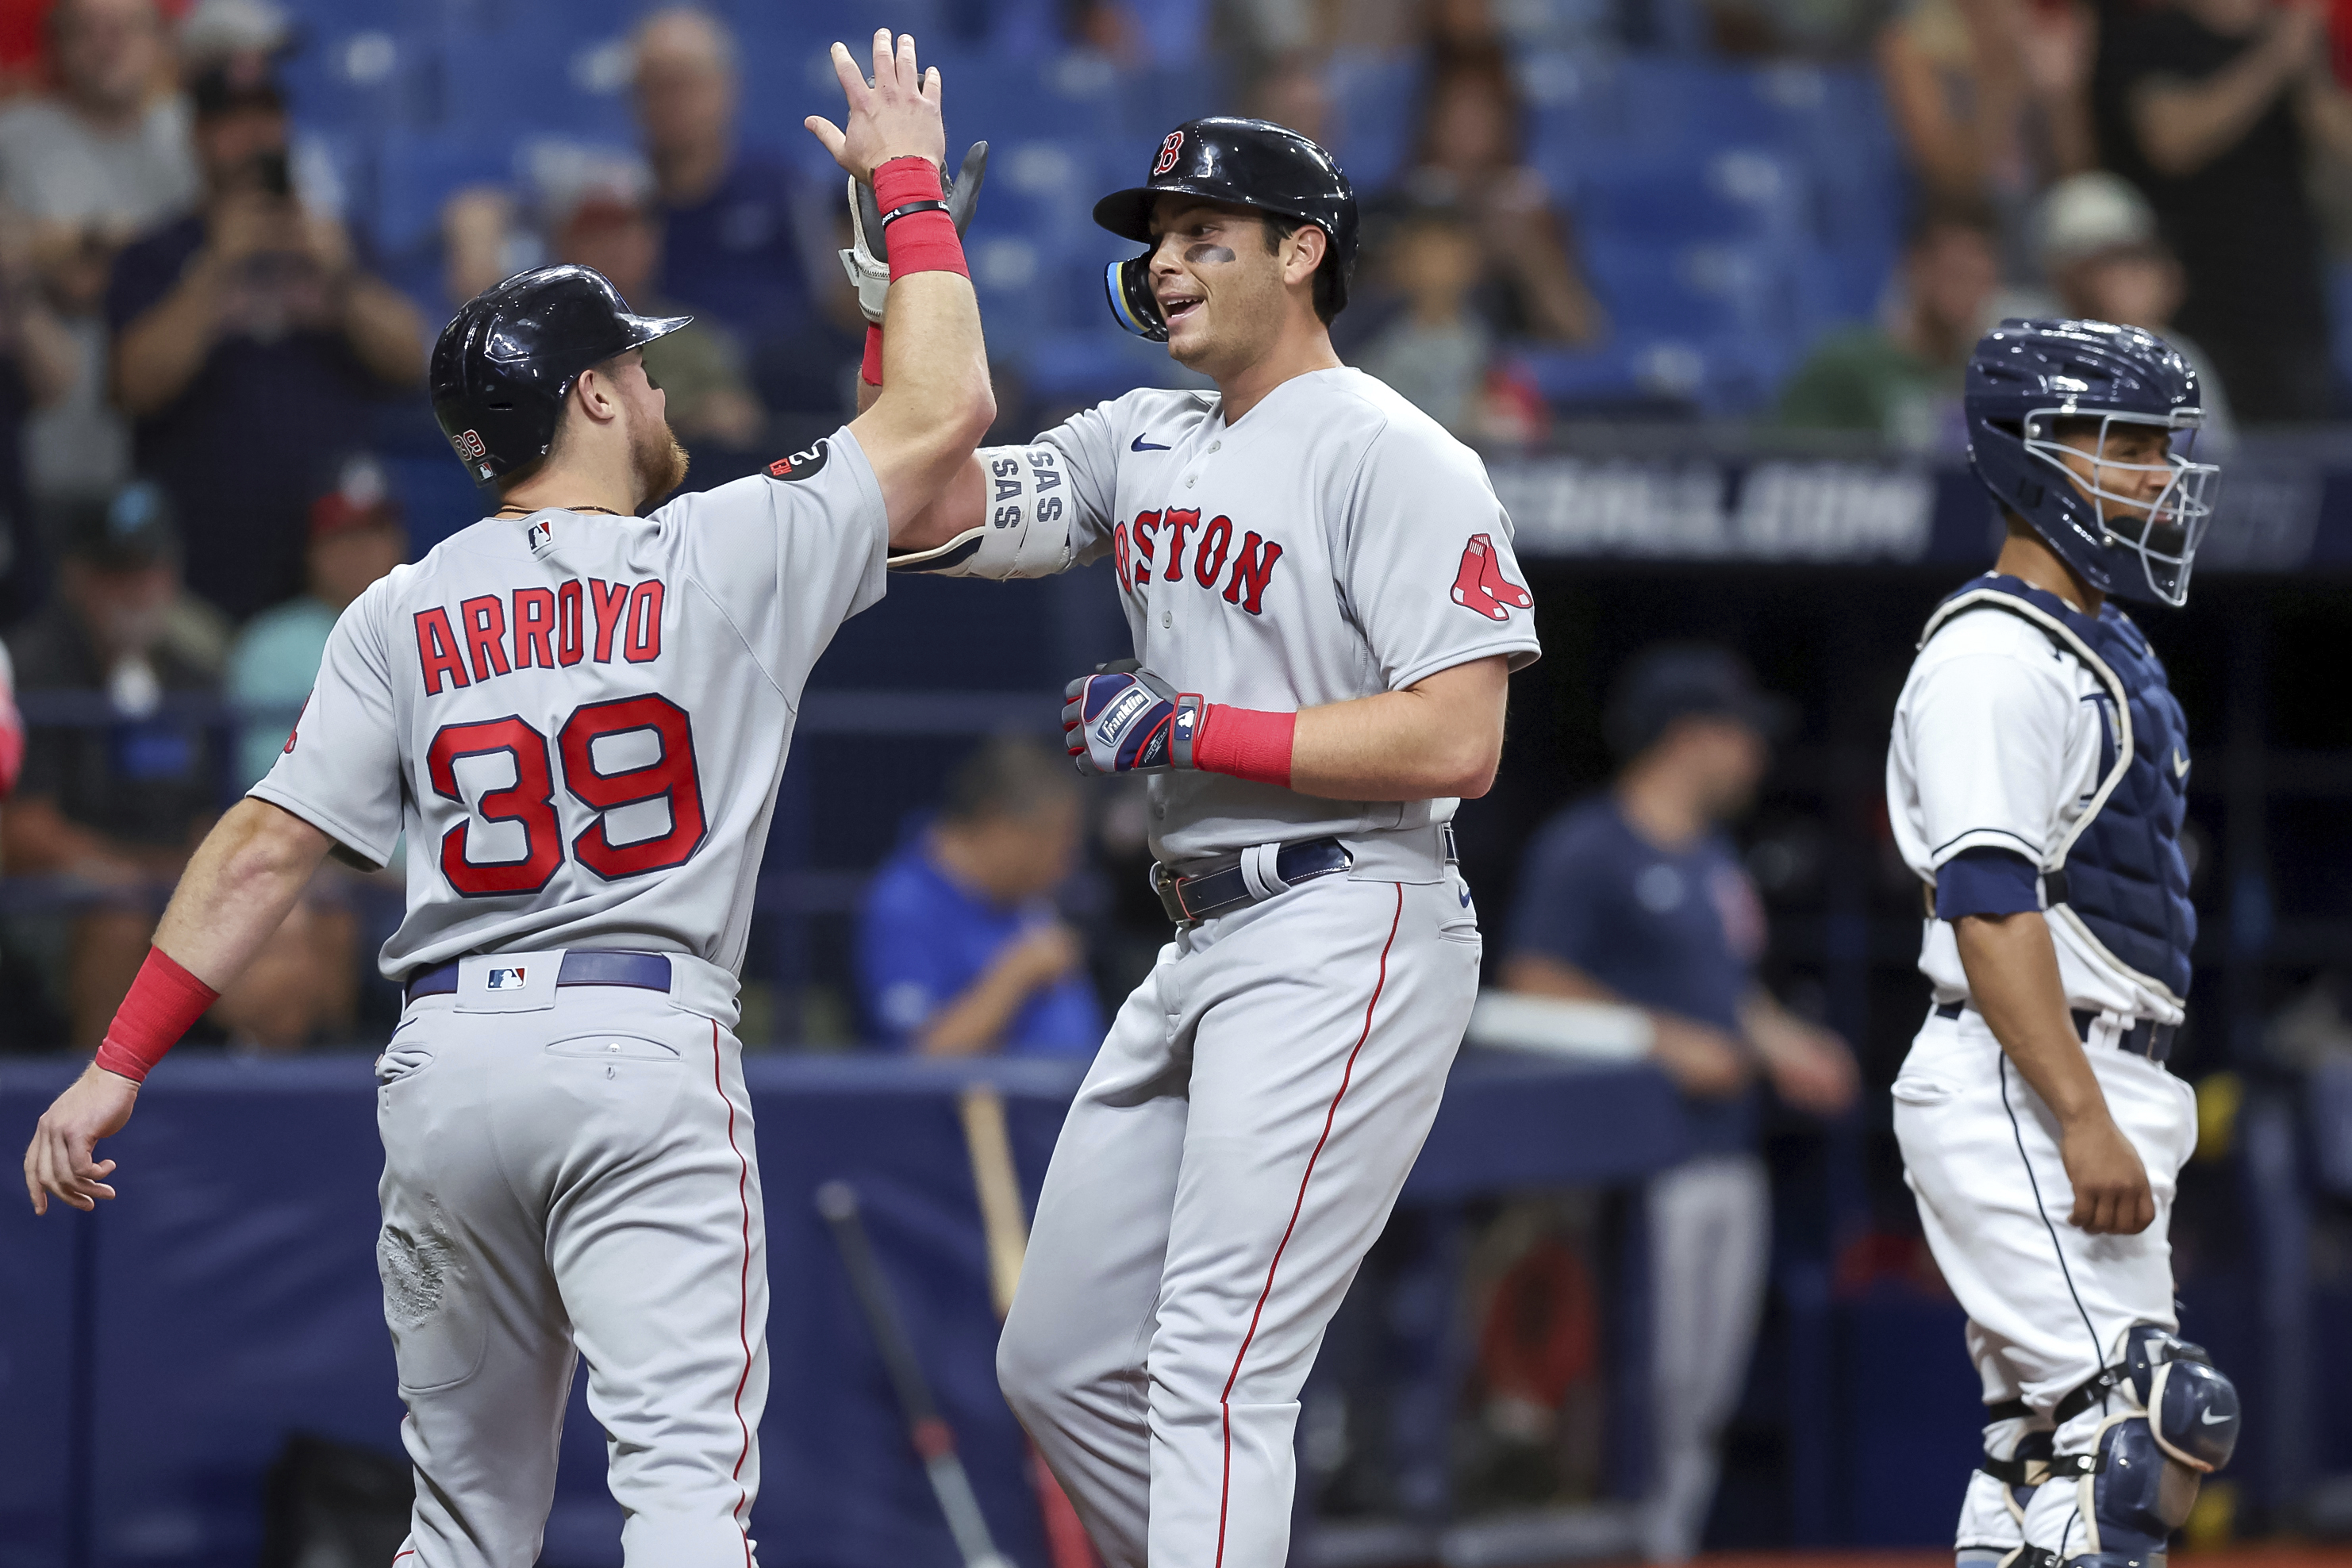 Red Sox back Paxton with 3 home runs and snap their 5-game skid